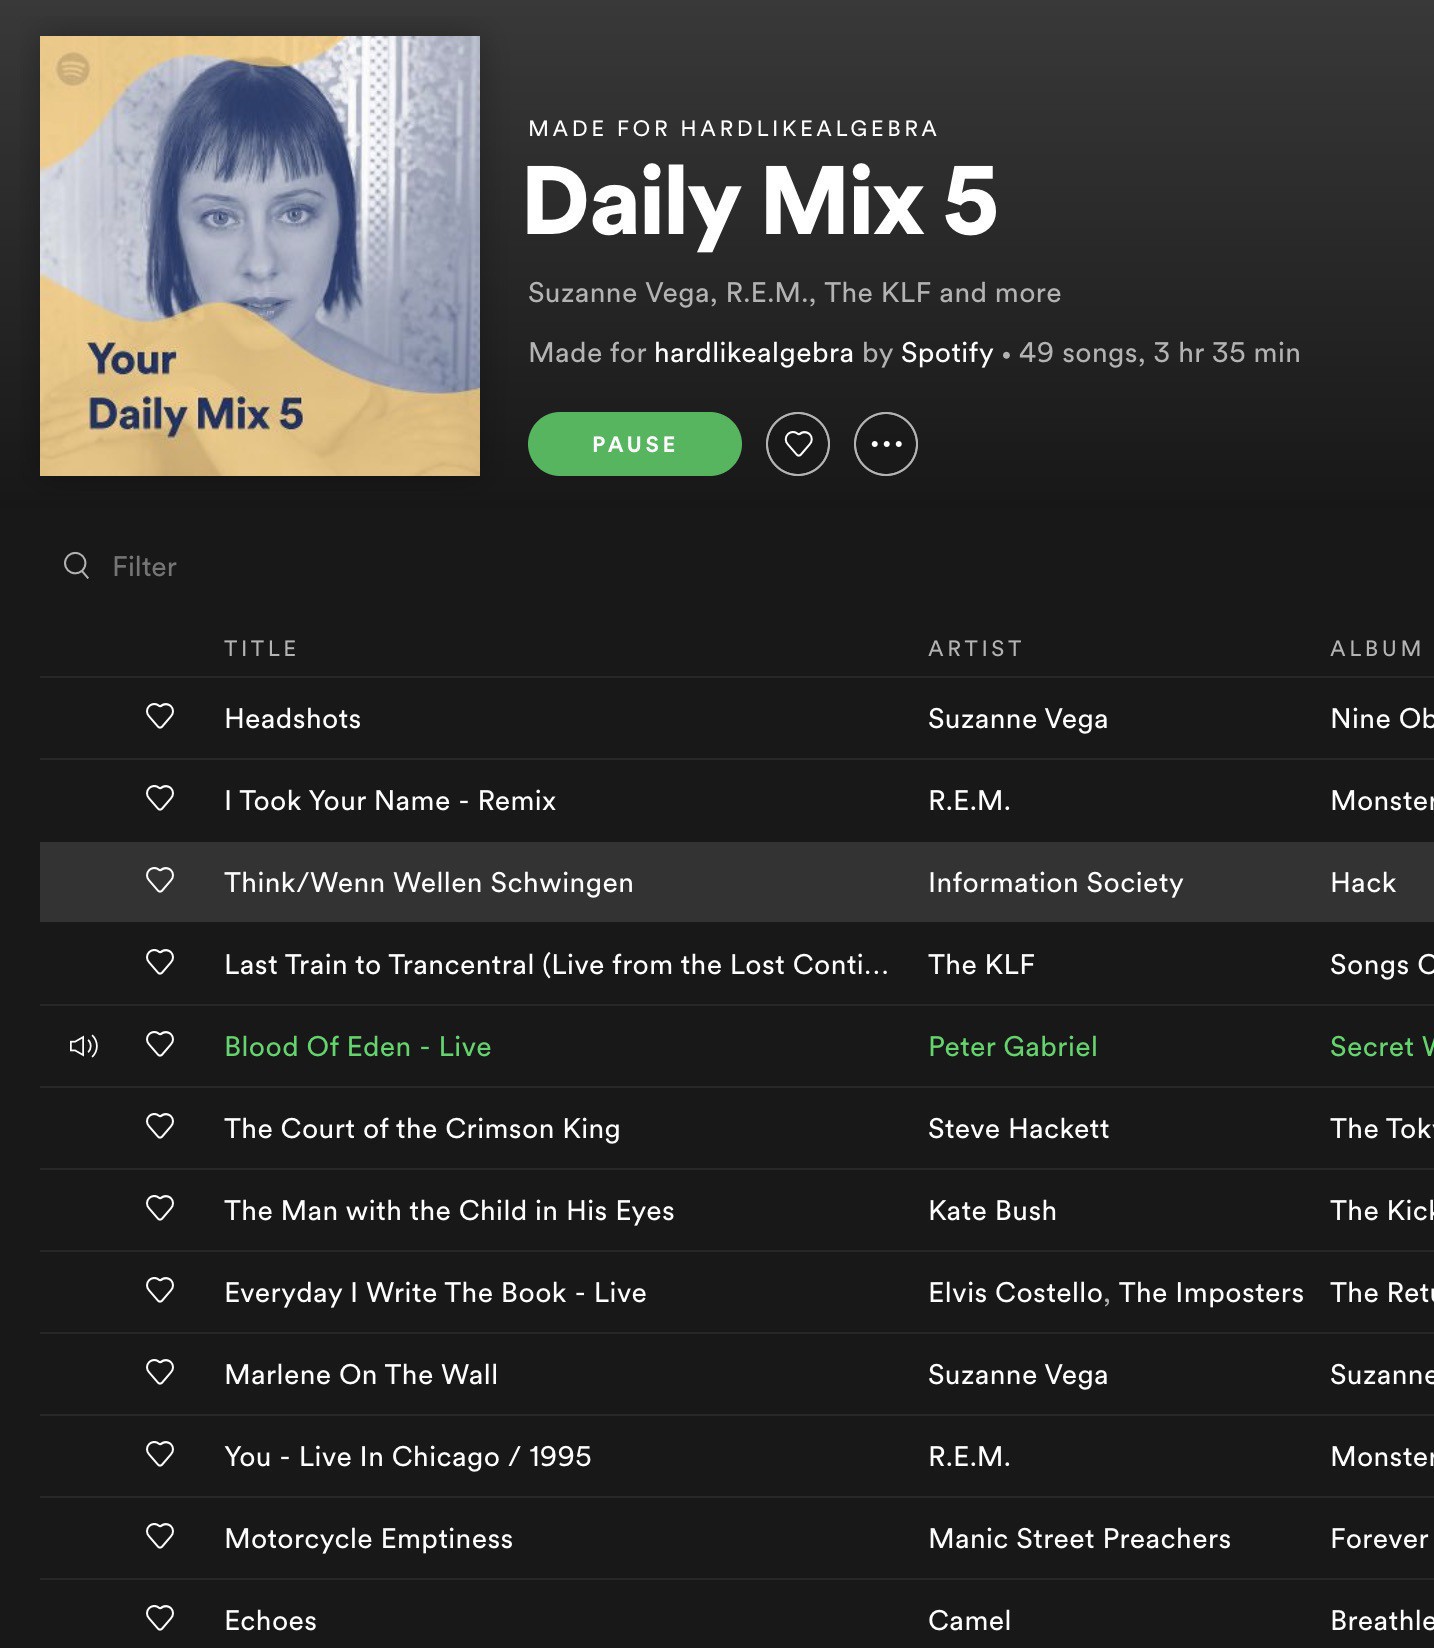 Screenshot of daily mix from spotify, listing artists including suzanne vega, the klf, REM, and peter gabriel